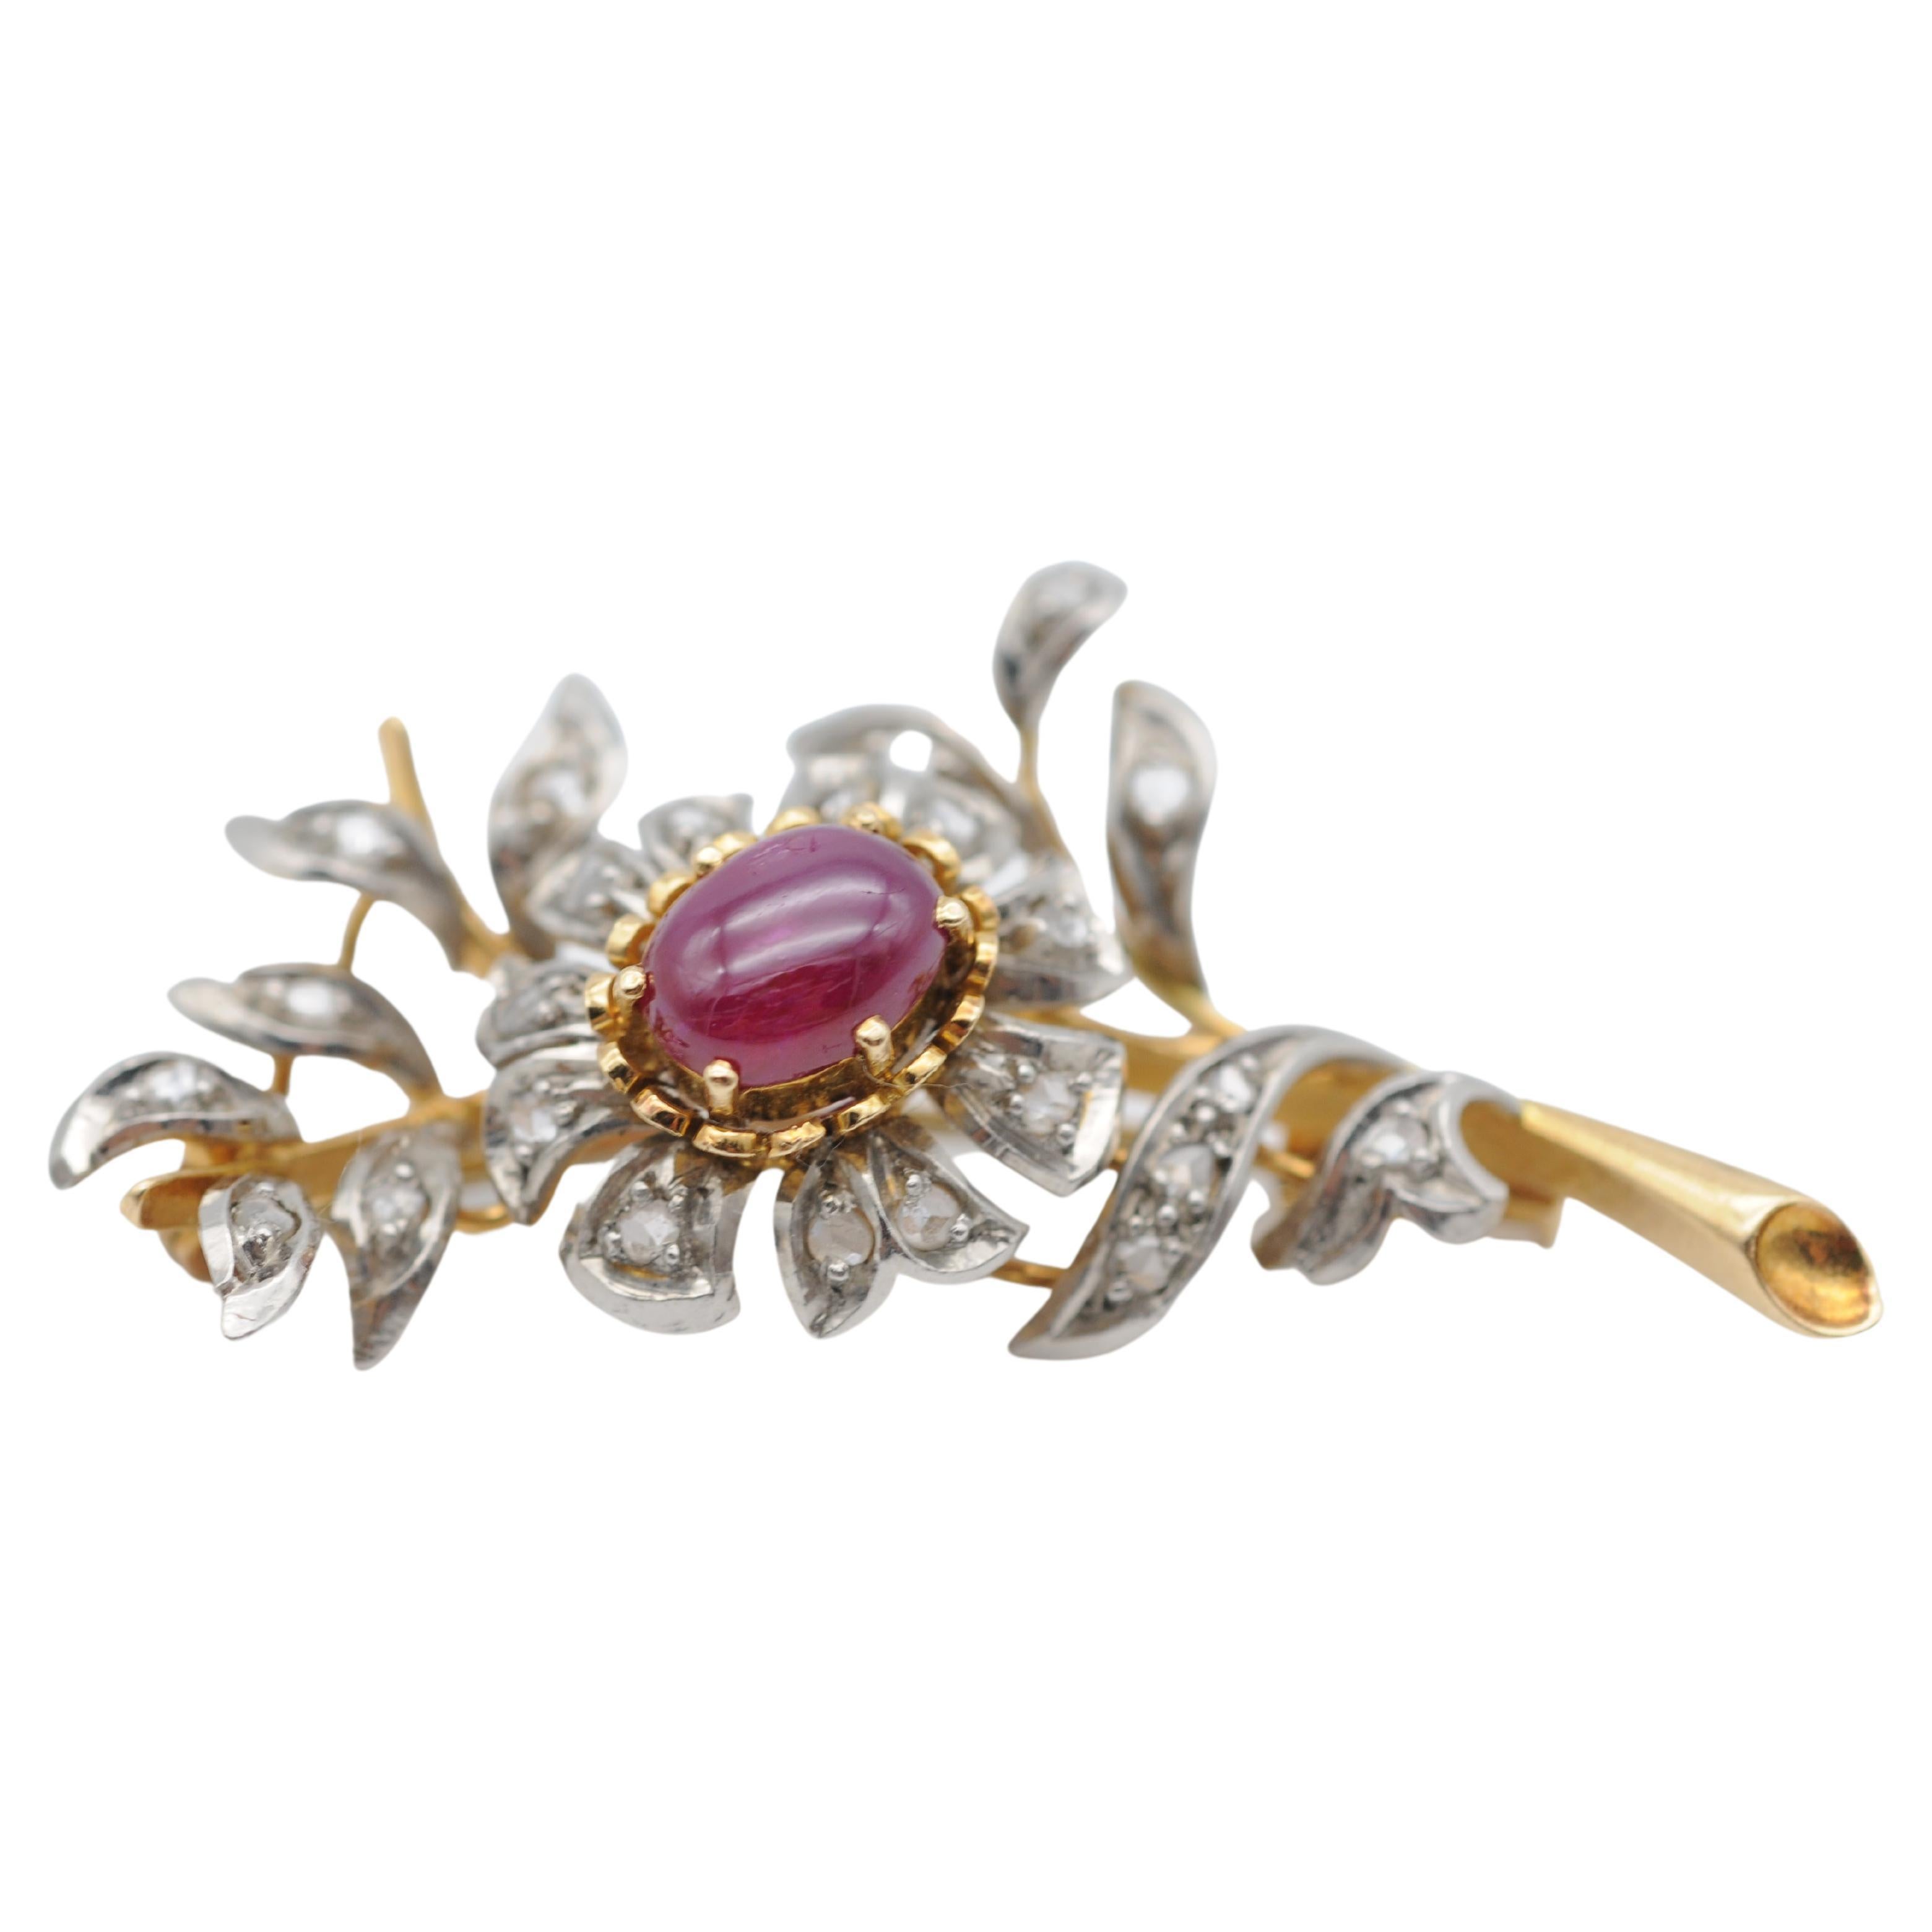 Fancy Brooch in 18k yellow gold and diamonds